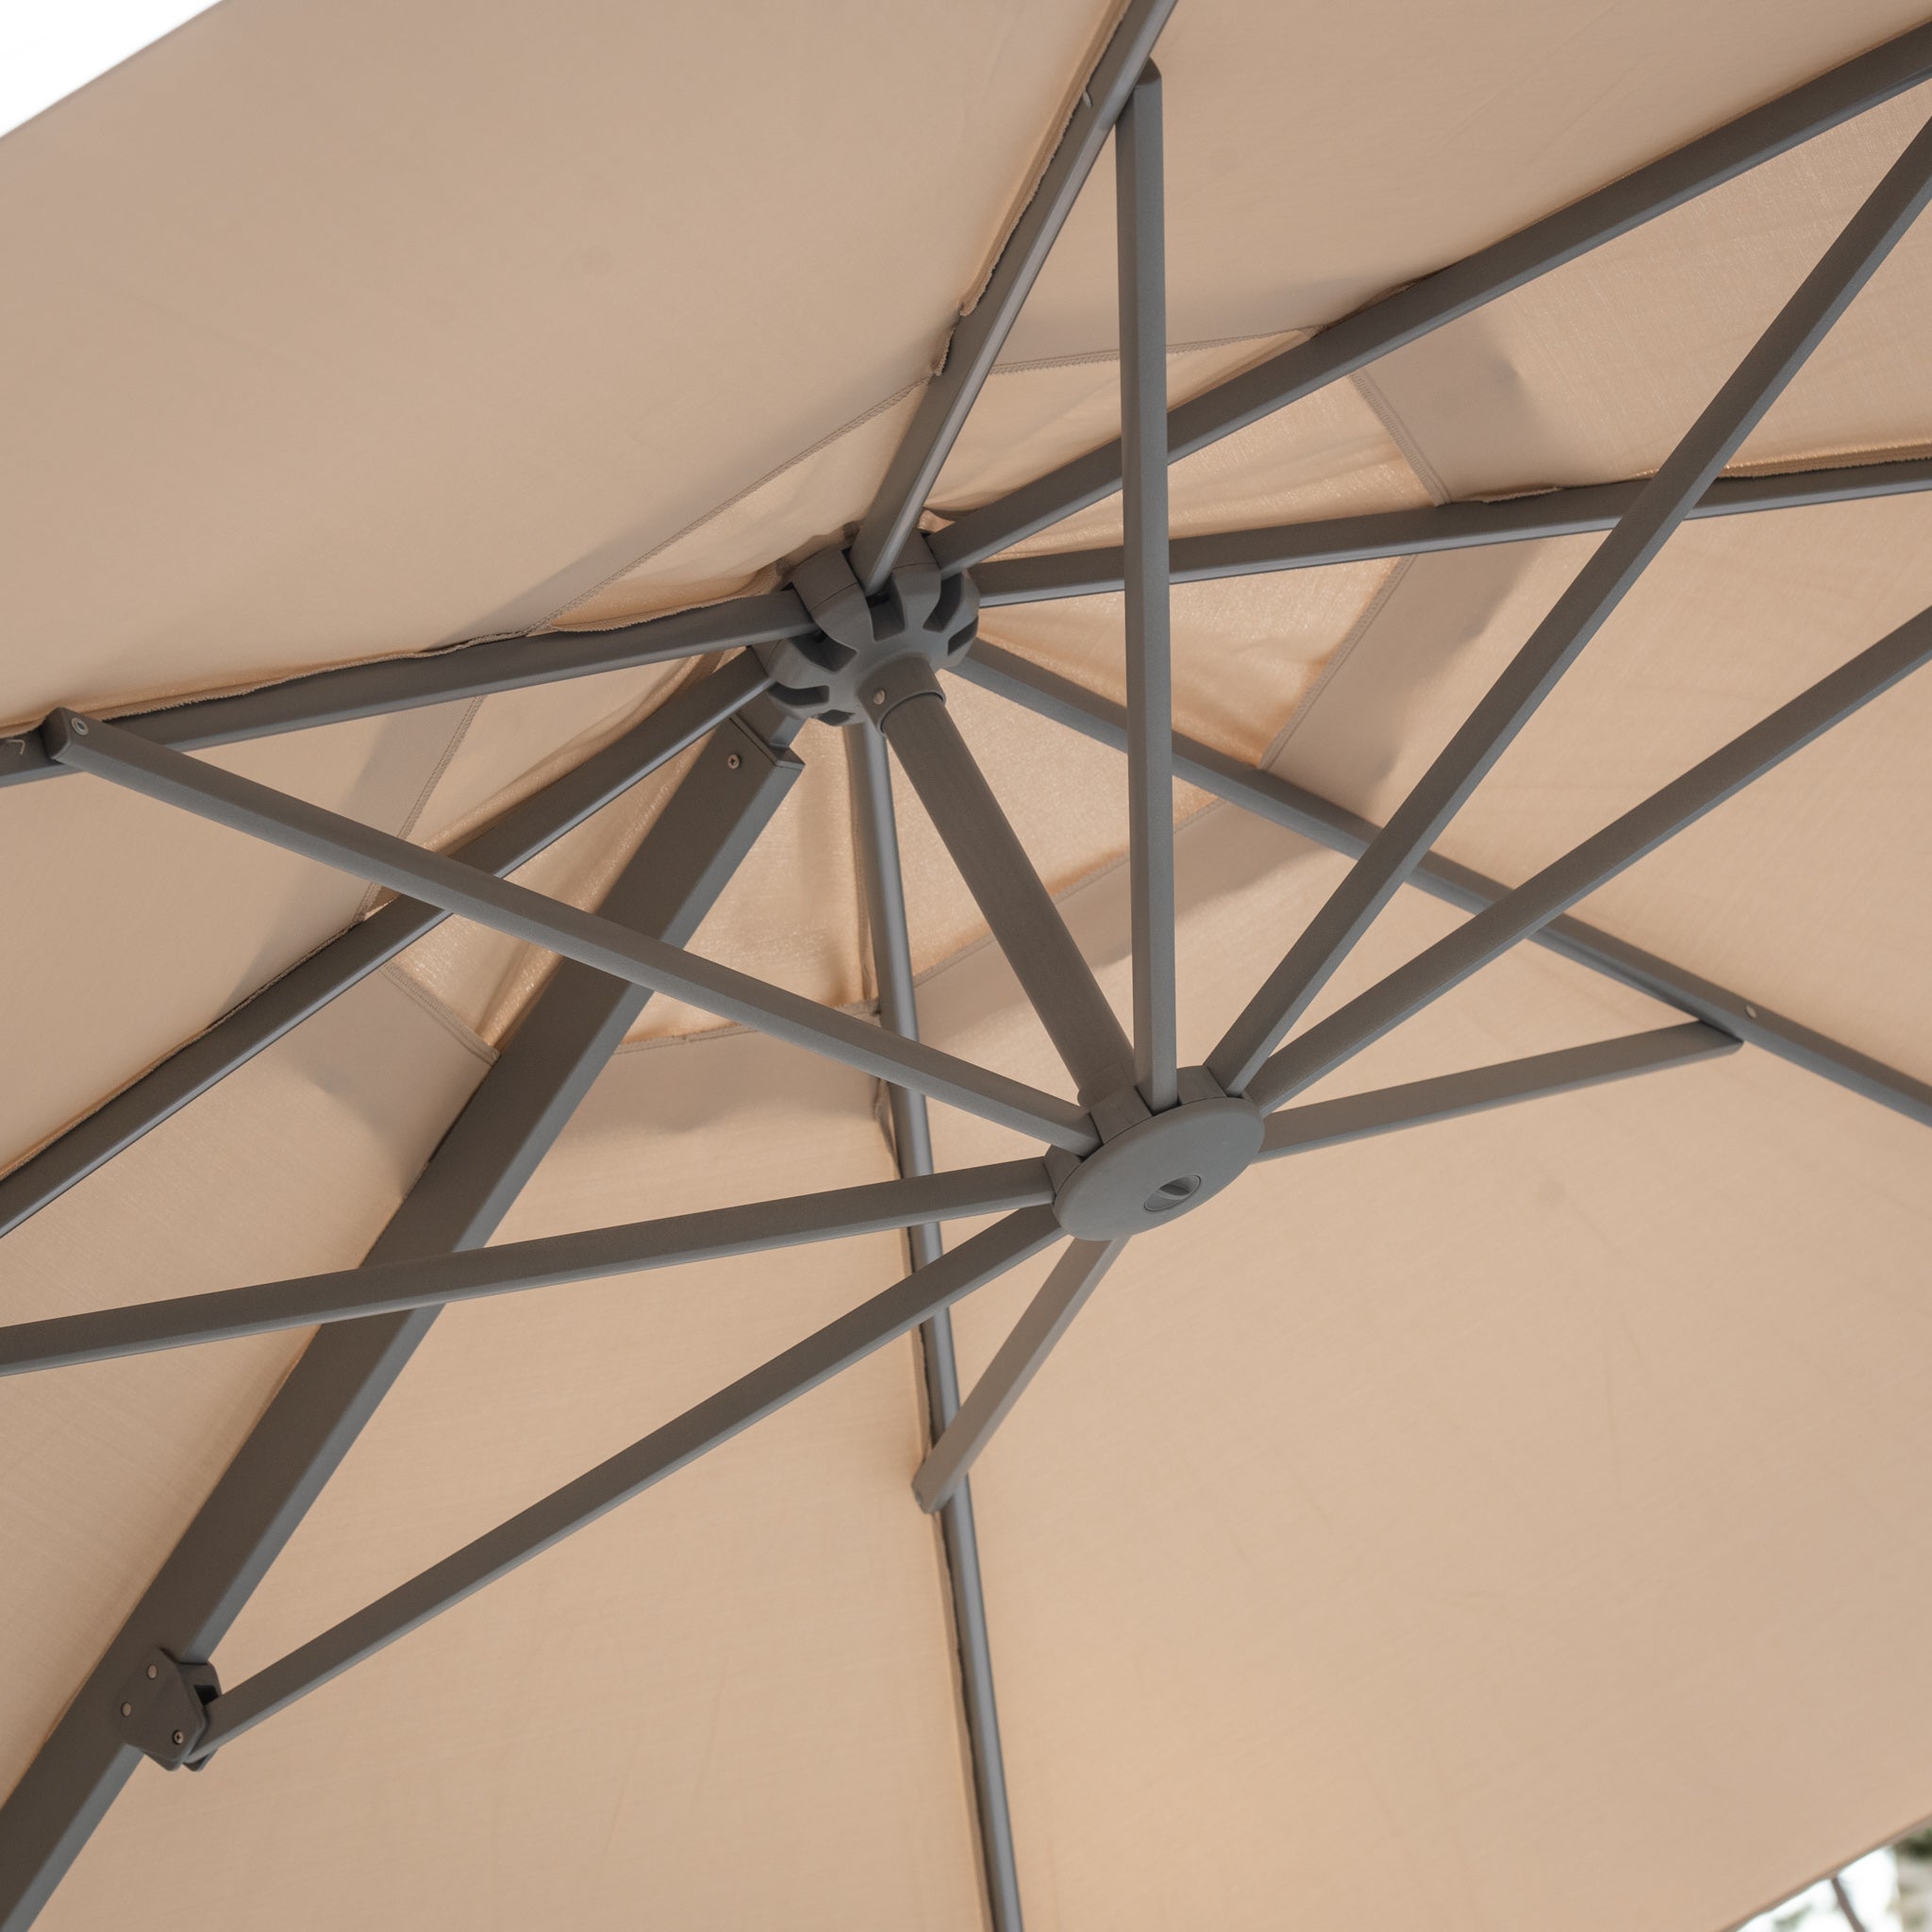 Ares 3.5m Round Cantilever Parasol with Solar powered LED Lights in Beige